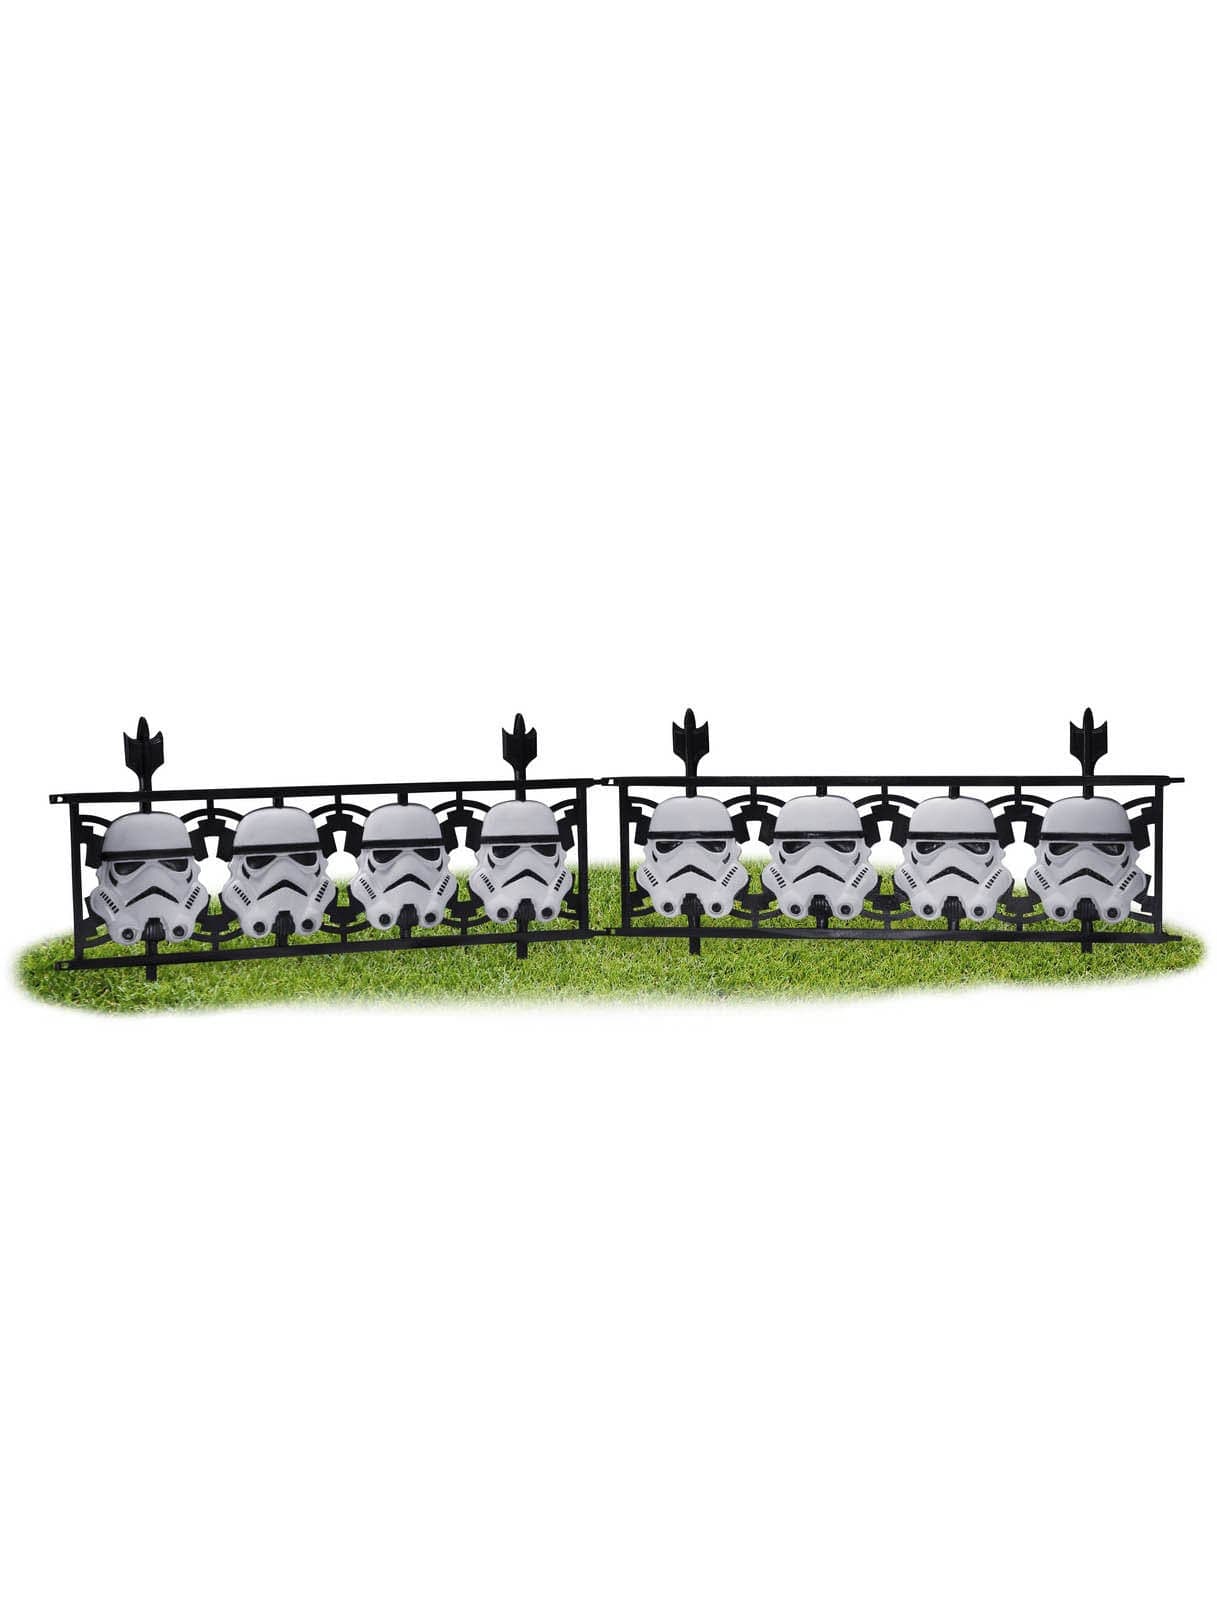 Star Wars Stormtrooper 2 Piece Cemetery Fence - costumes.com